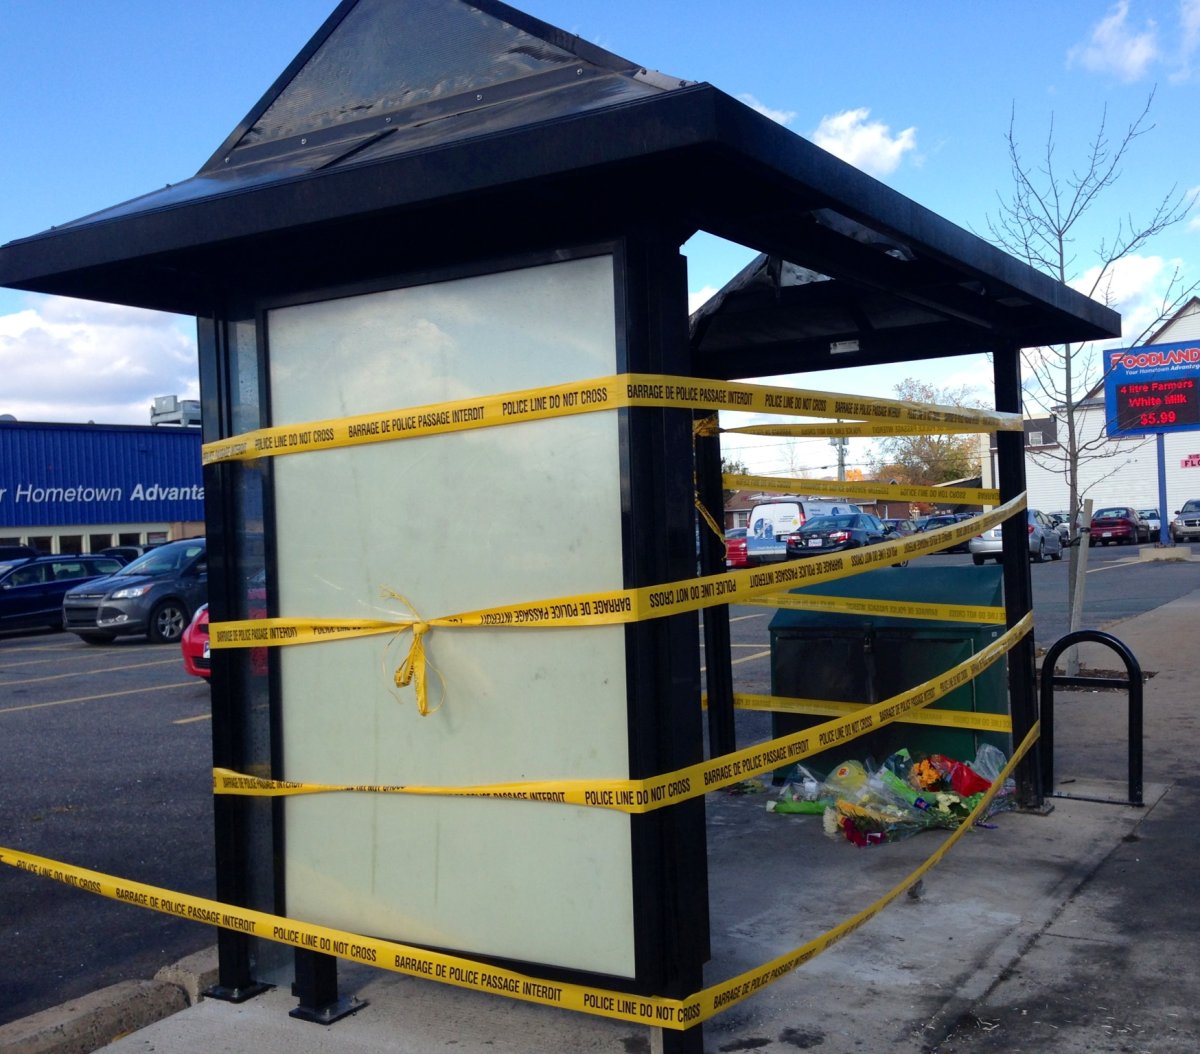 Police tape surrounds a burned bus stop in Berwick, N.S. where the body of homeless man Harley Lawrence was found on Oct. 23, 2013.